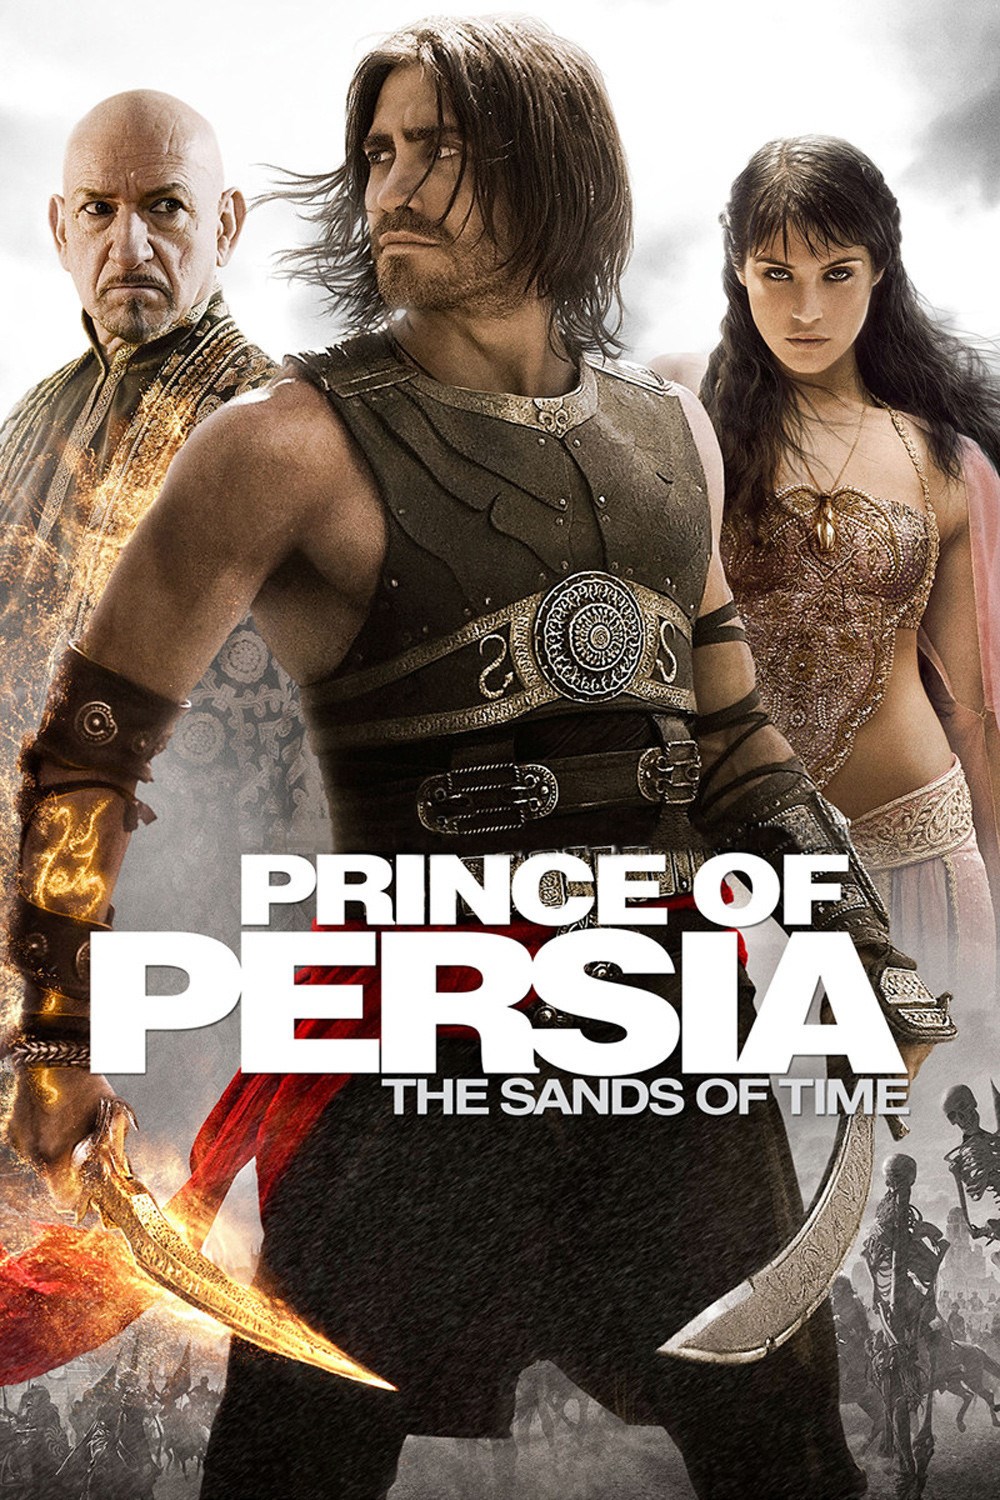 Prince.of.persia.the.sands.of.time 2016 dvdrip axxo subtitles